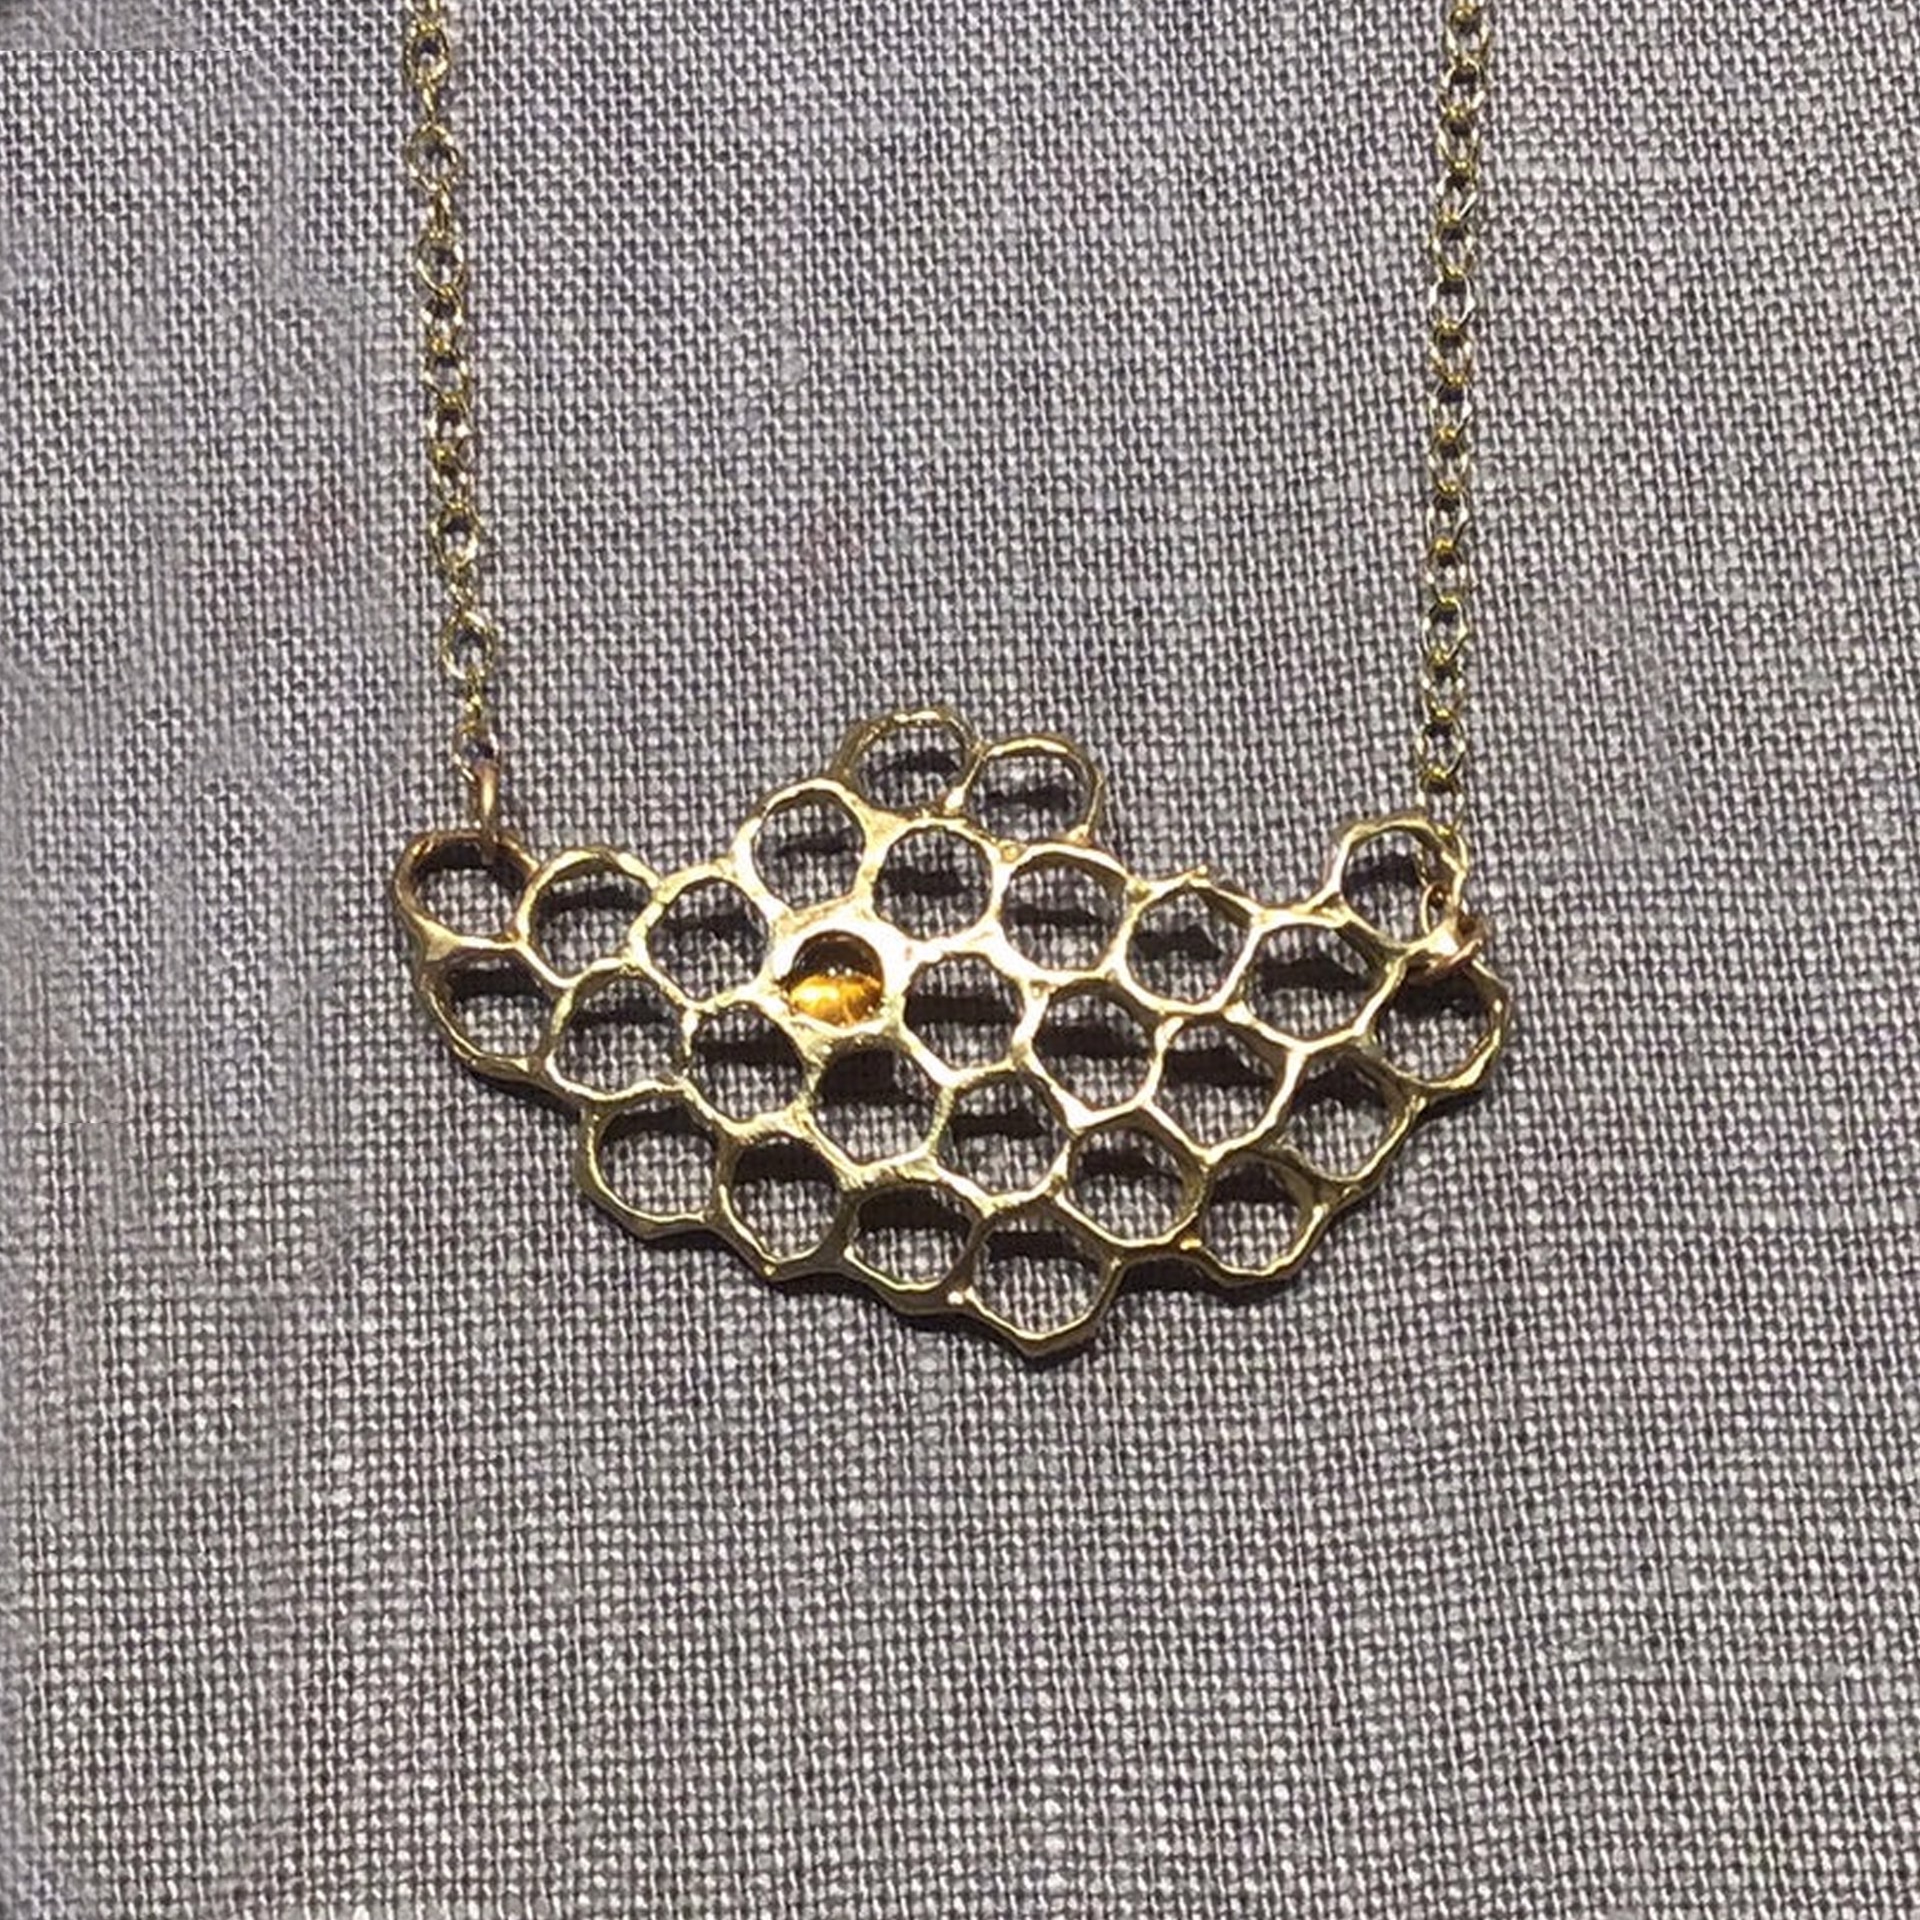 Honeycomb necklace with citrine by Bee Amour